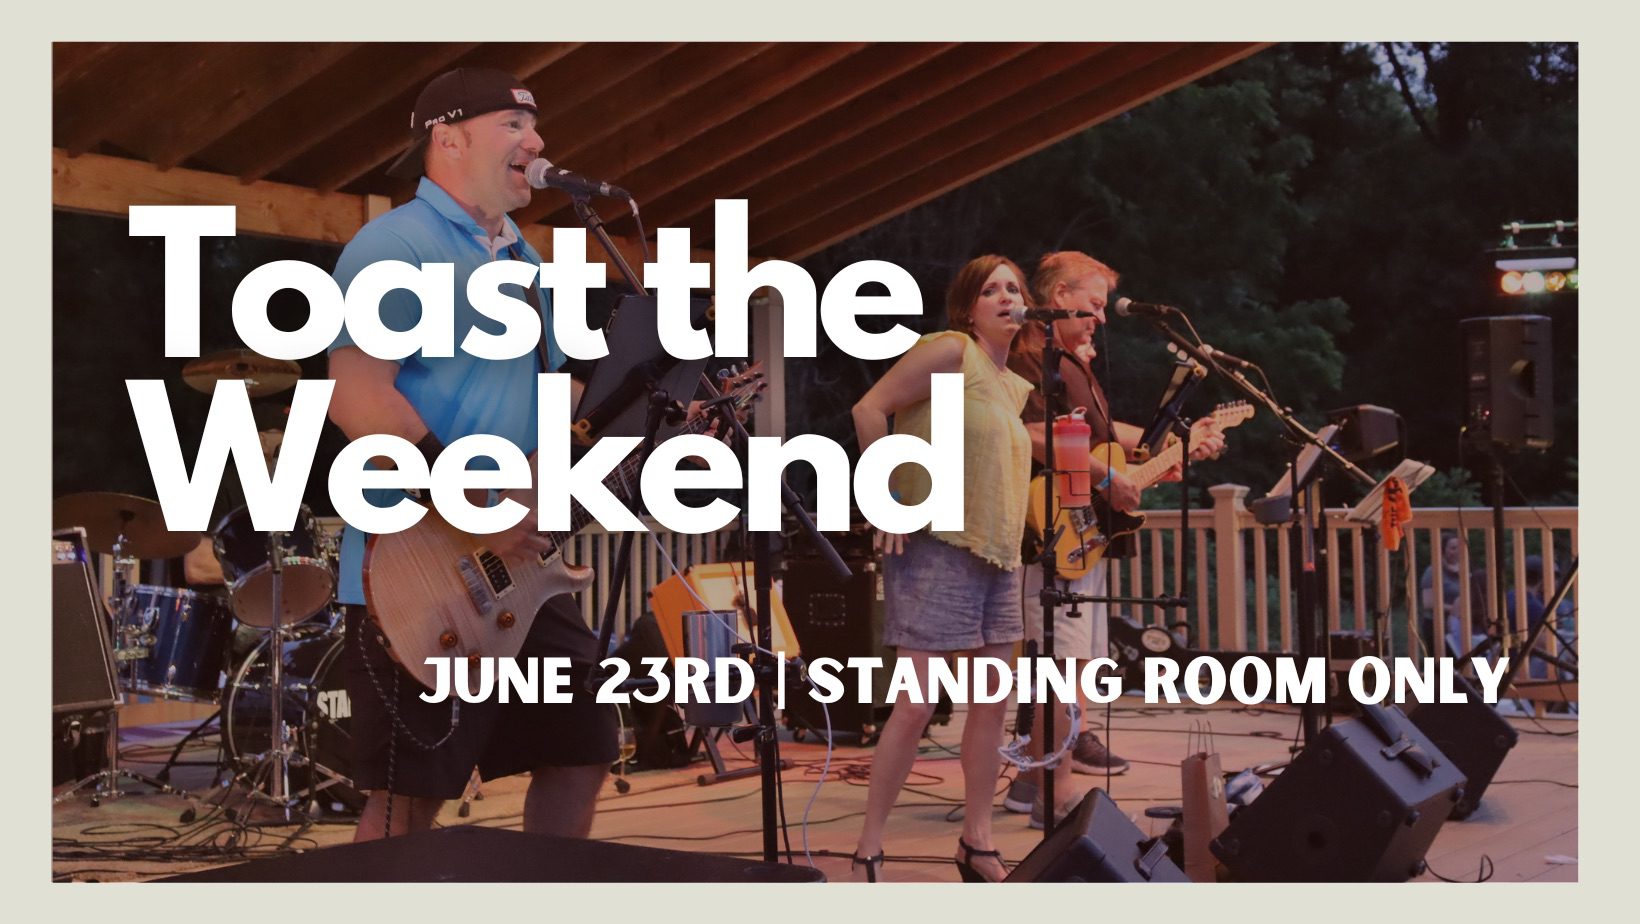 Toast The Weekend: Standing Room Only